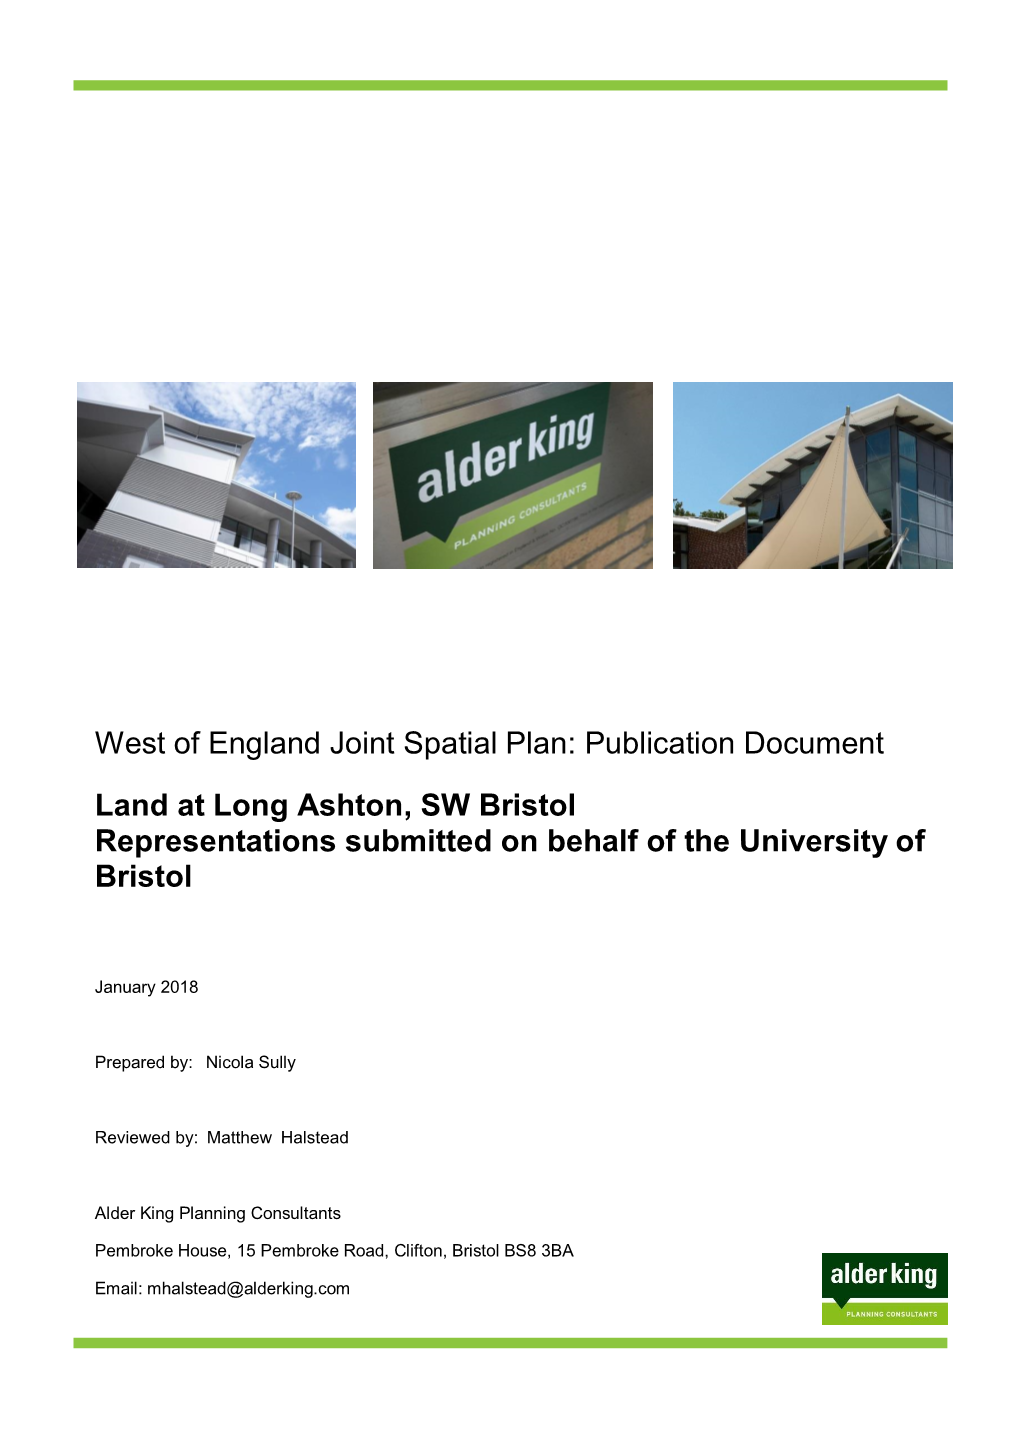 West of England Joint Spatial Plan: Publication Document Land at Long Ashton, SW Bristol Representations Submitted on Behalf Of